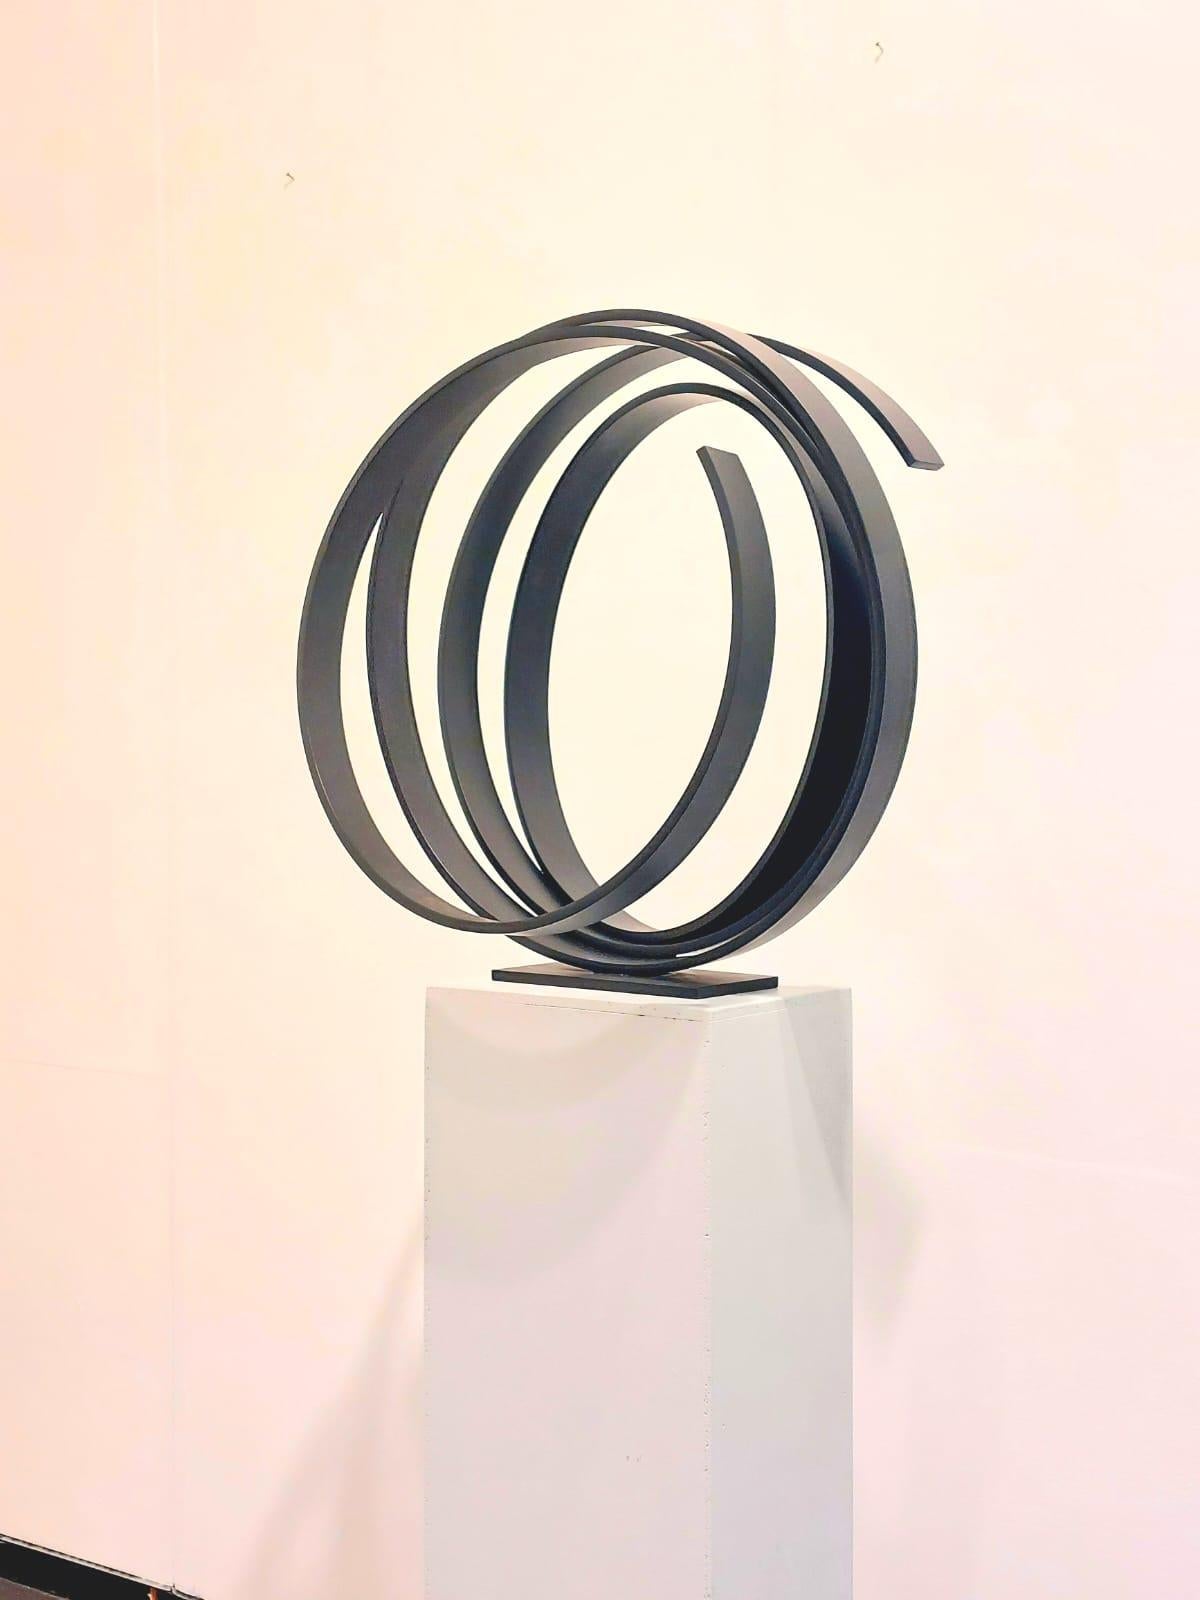 Large Black Orbit by Kuno Vollet - Large Contemporary Round Orbit sculpture  For Sale 3